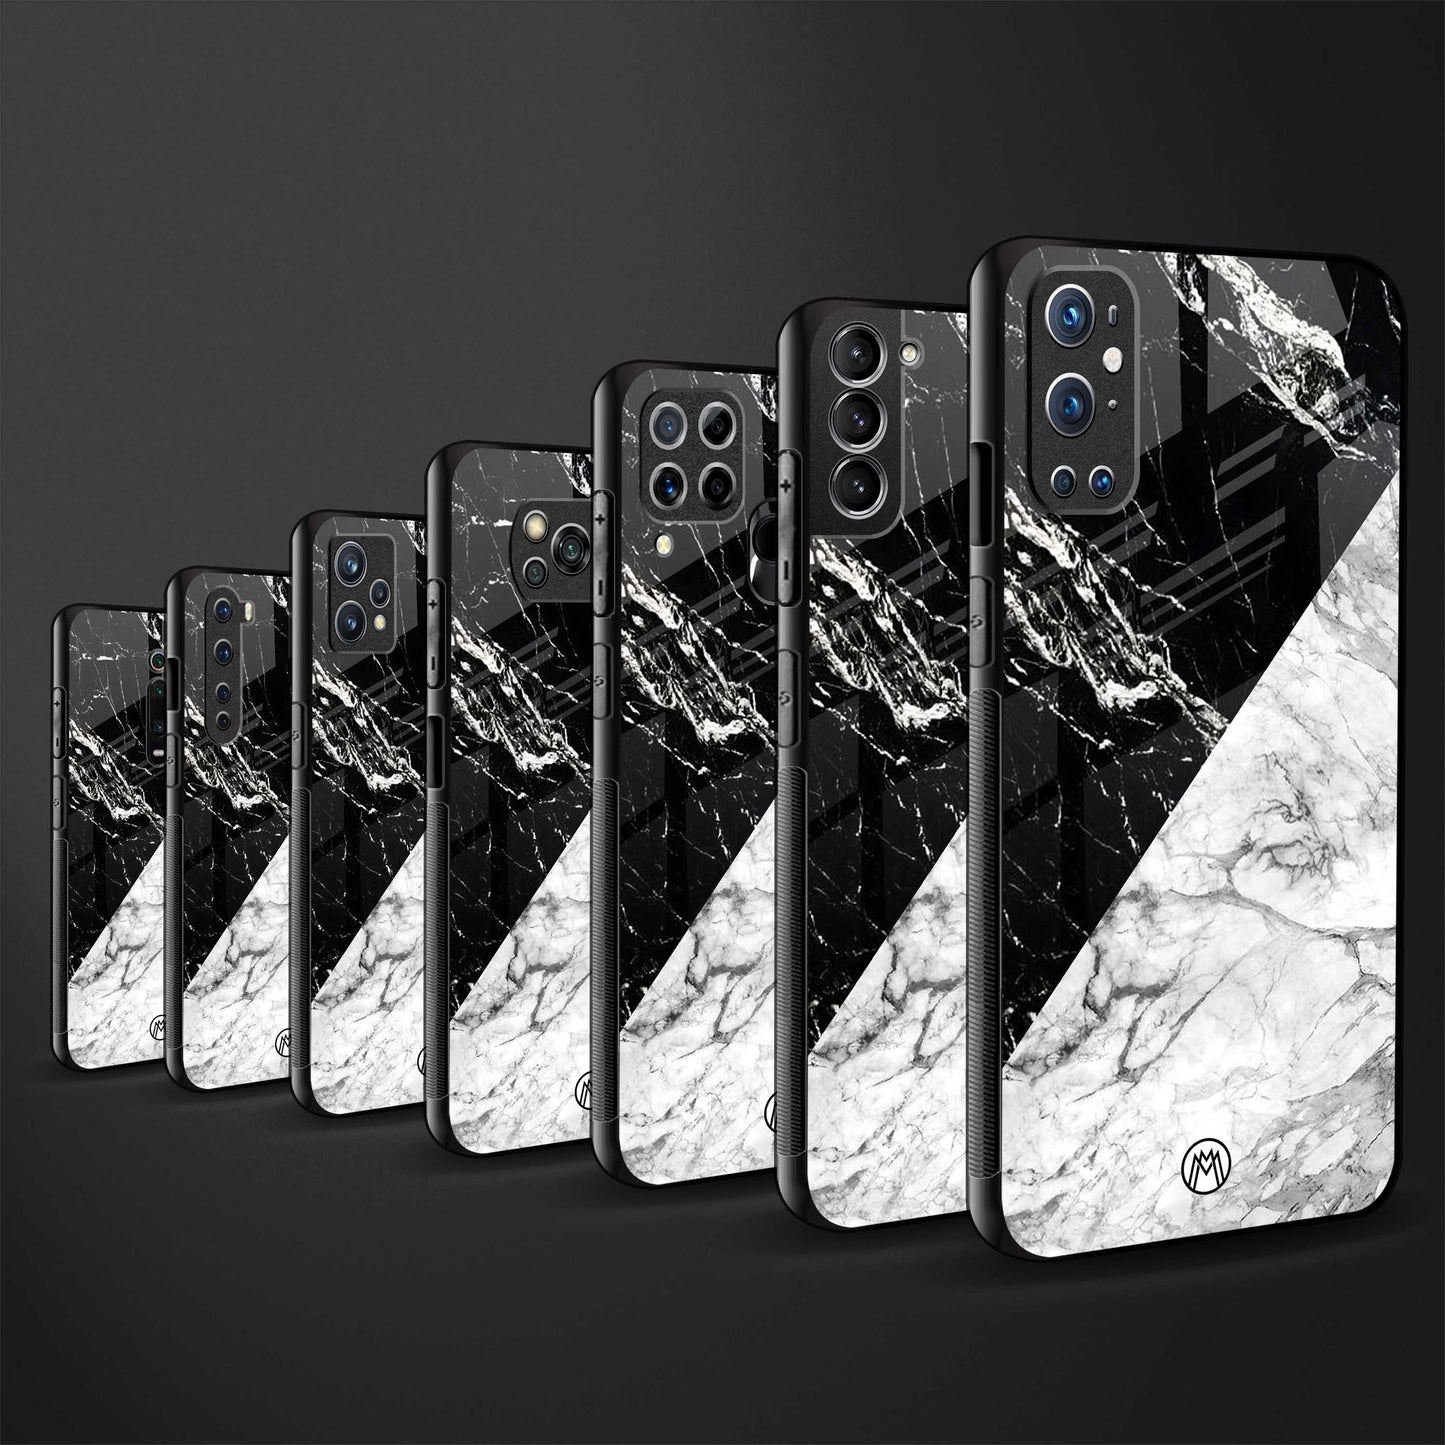 fatal contradiction phone cover for samsung galaxy s10 plus